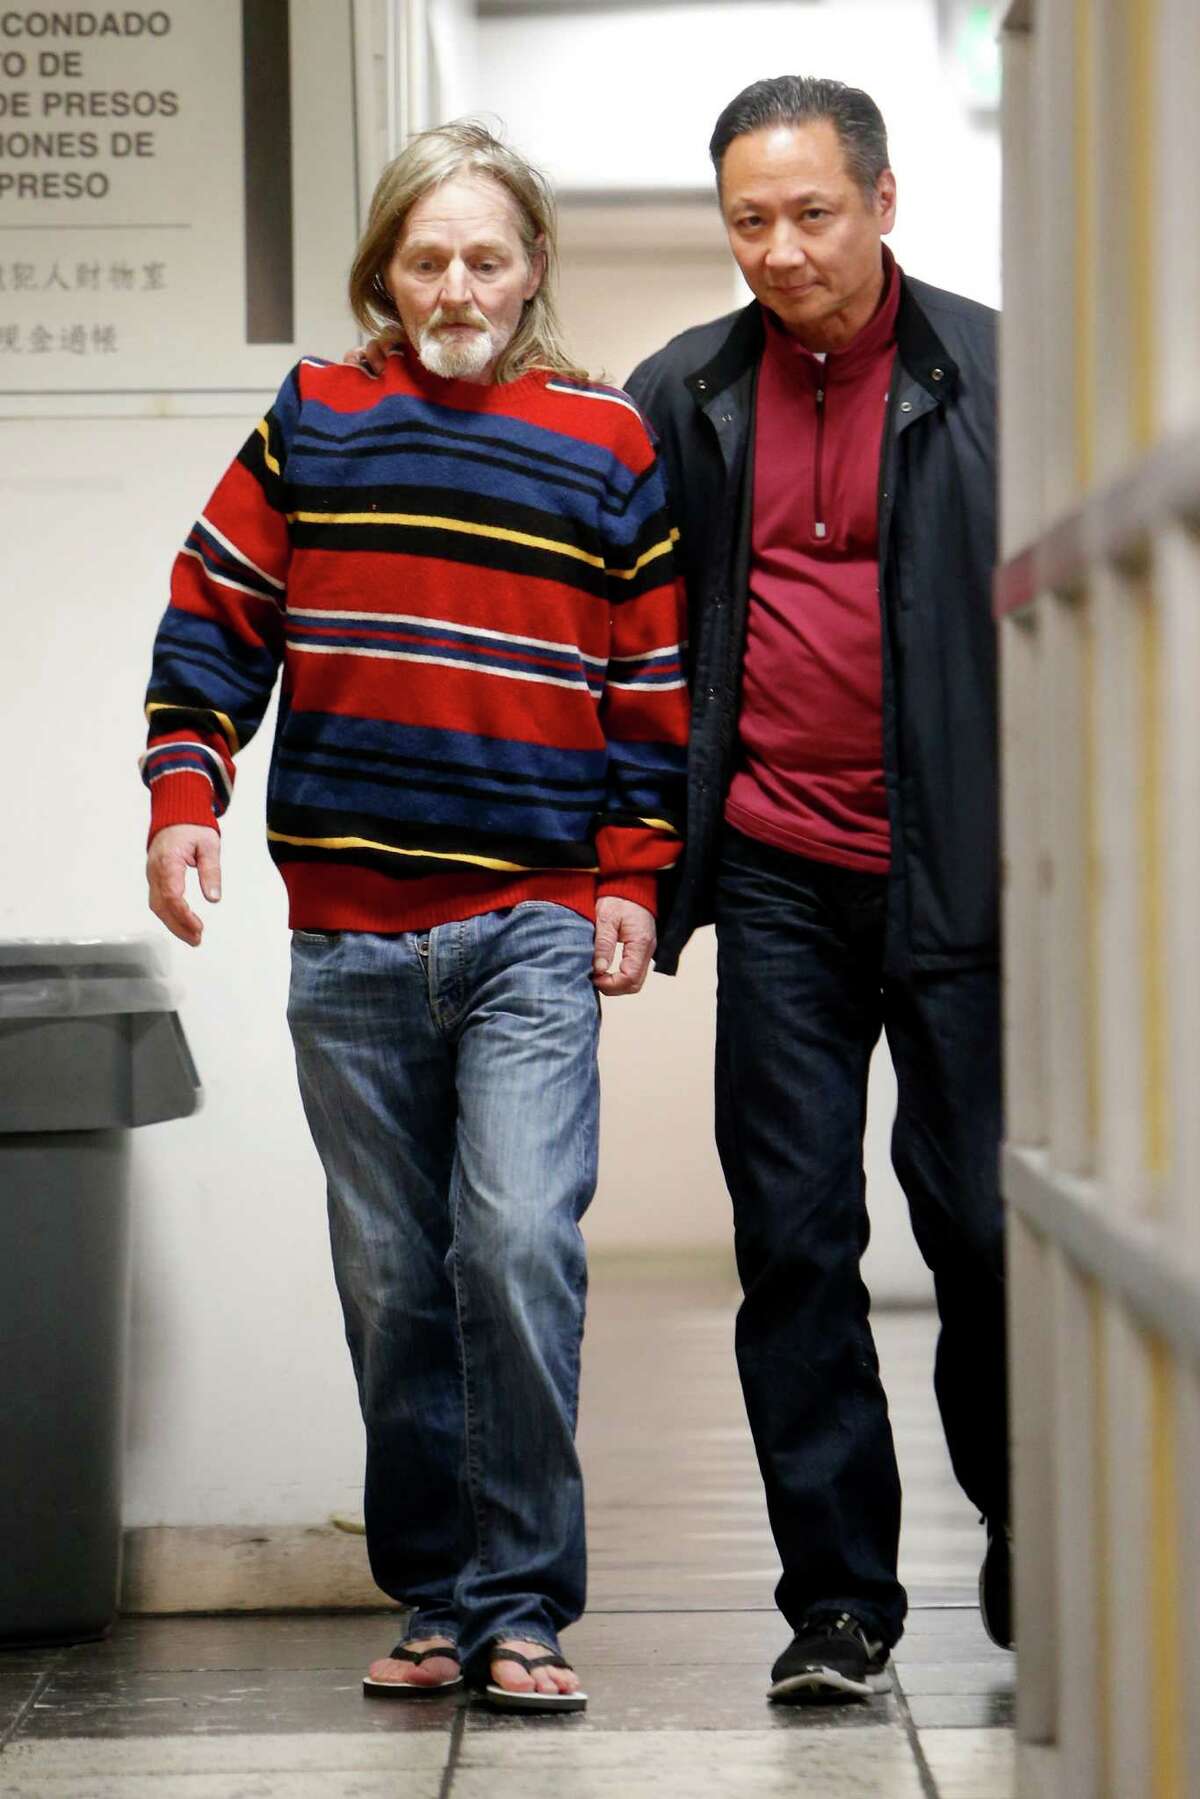 Mark Andrus leaves county jail with Public Defender Jeff Adachi after no charges were filed against him in the murder of a man found in a suitcase. Photographed in San Francisco , Calif. on Tuesday, February 3, 2015.